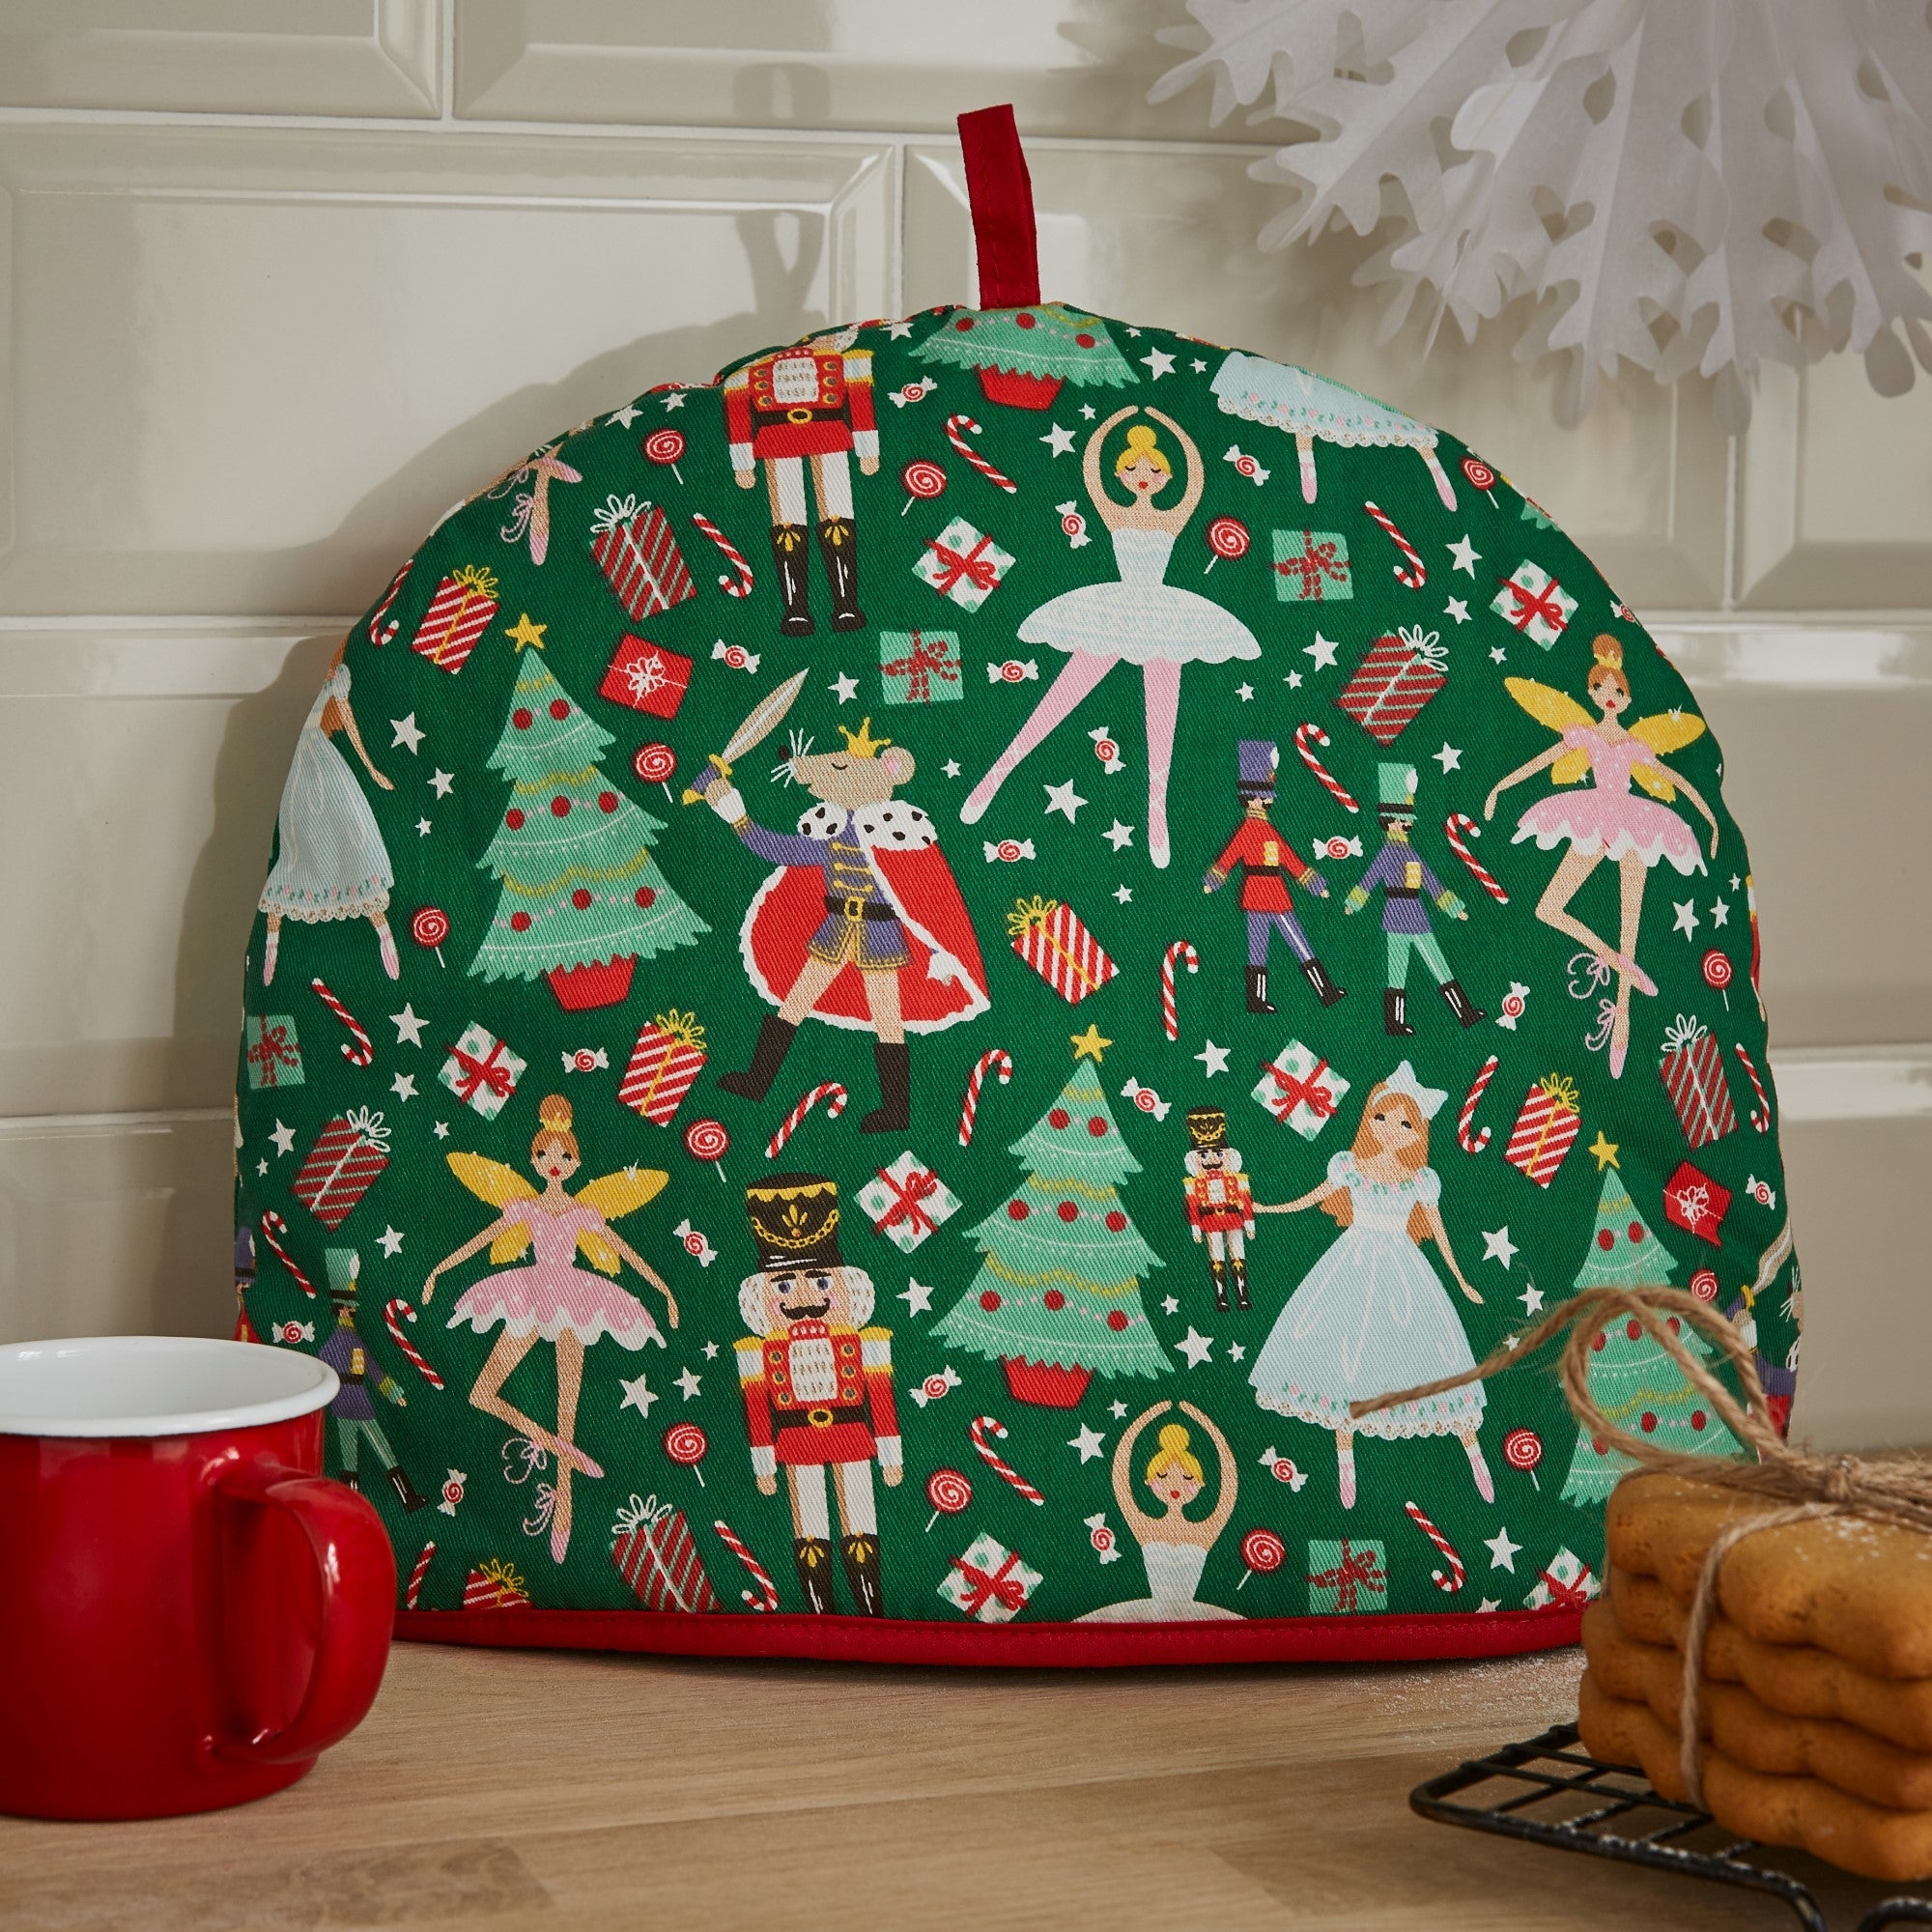 Ulster Weavers Tea Cosy - Nutcracker - Christmas (100% Cotton Outer; 100% Polyester wadding; CE marked, Green, 6 Cup Teapot)